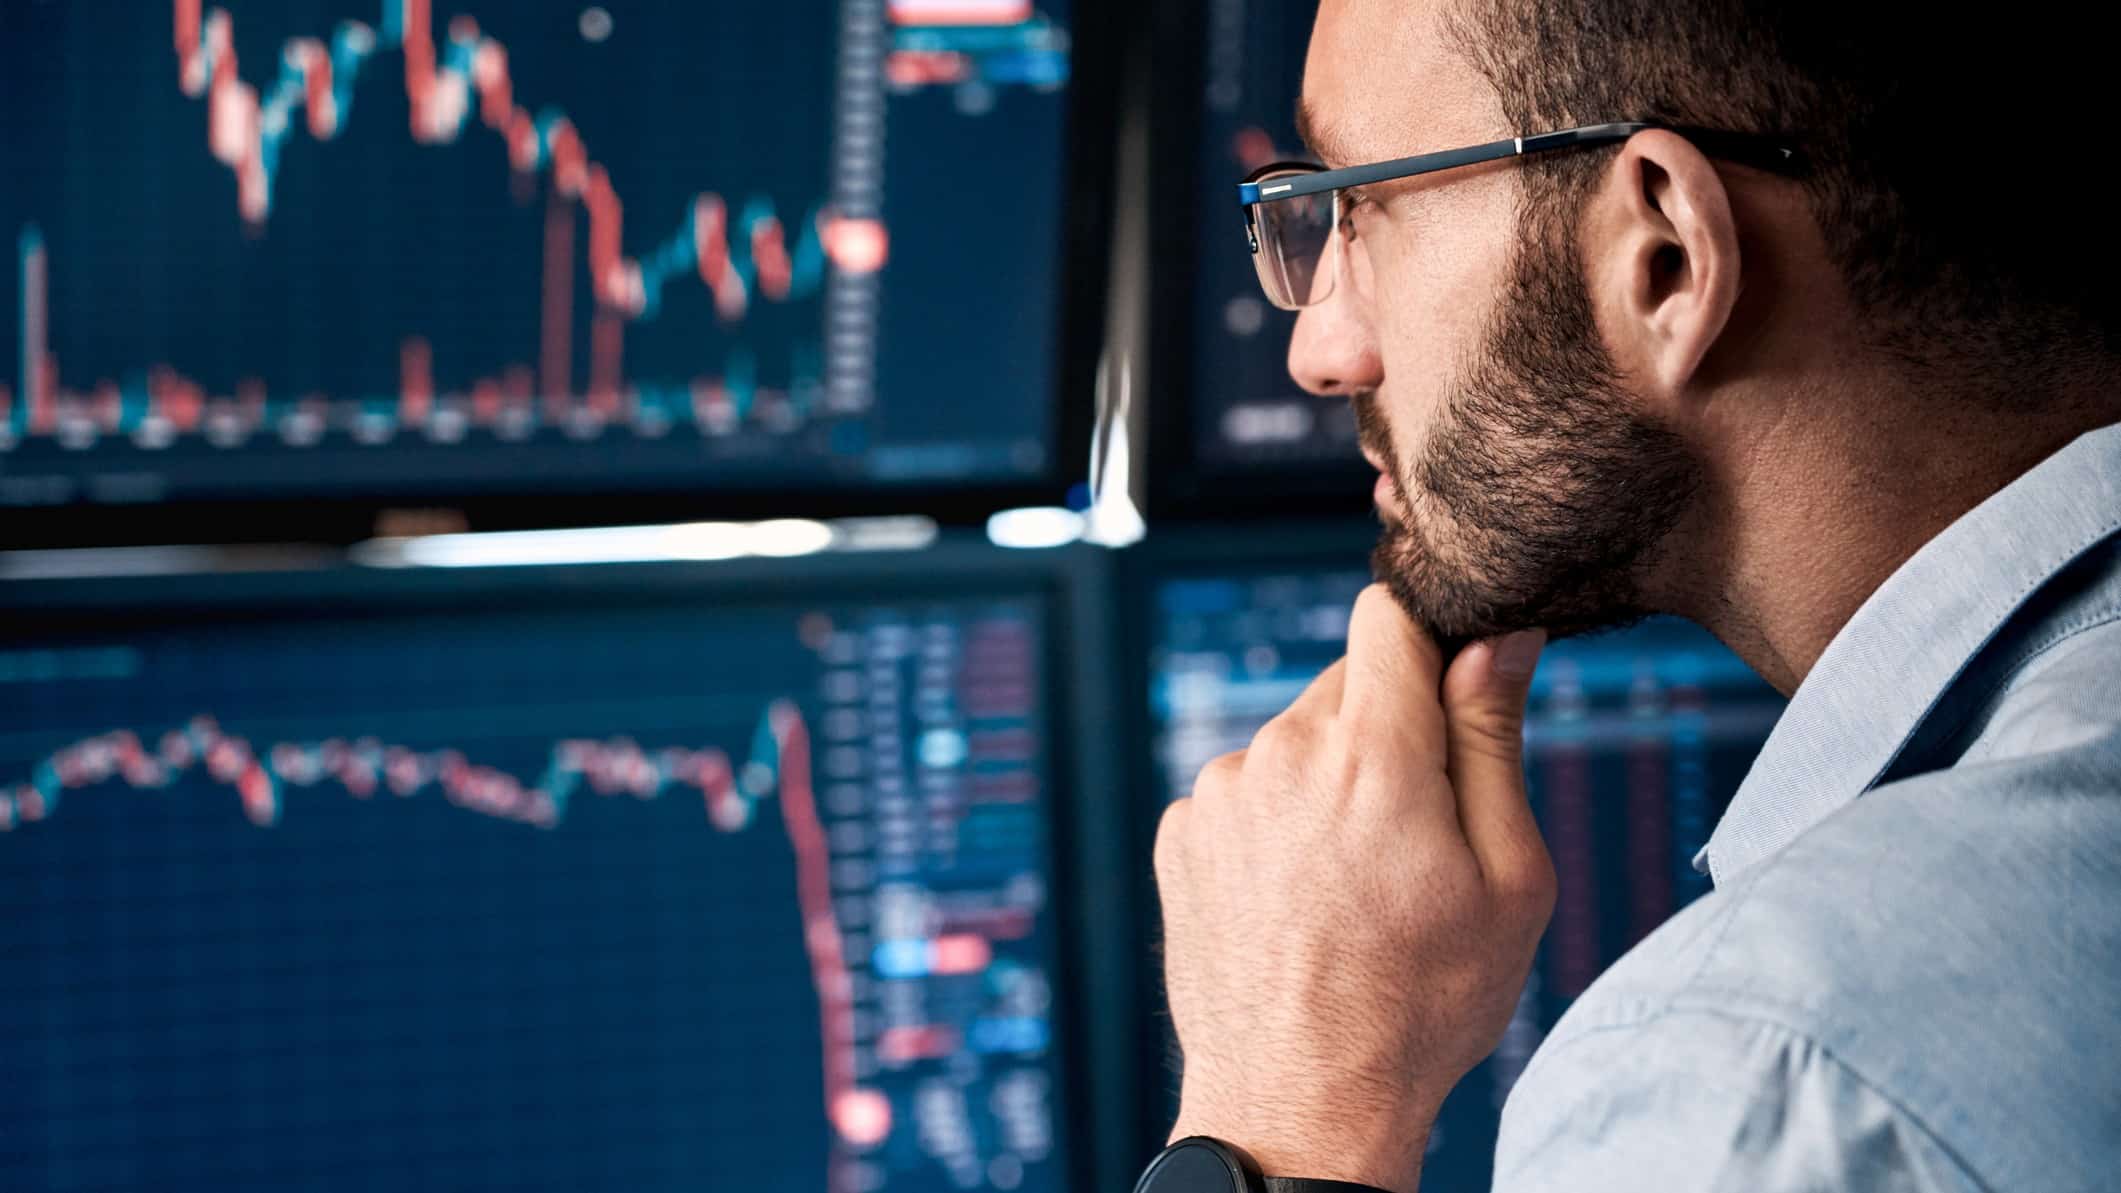 An ASX200 market analyst holds his hand to his chin and looks closely at his computer screens watching share price movements